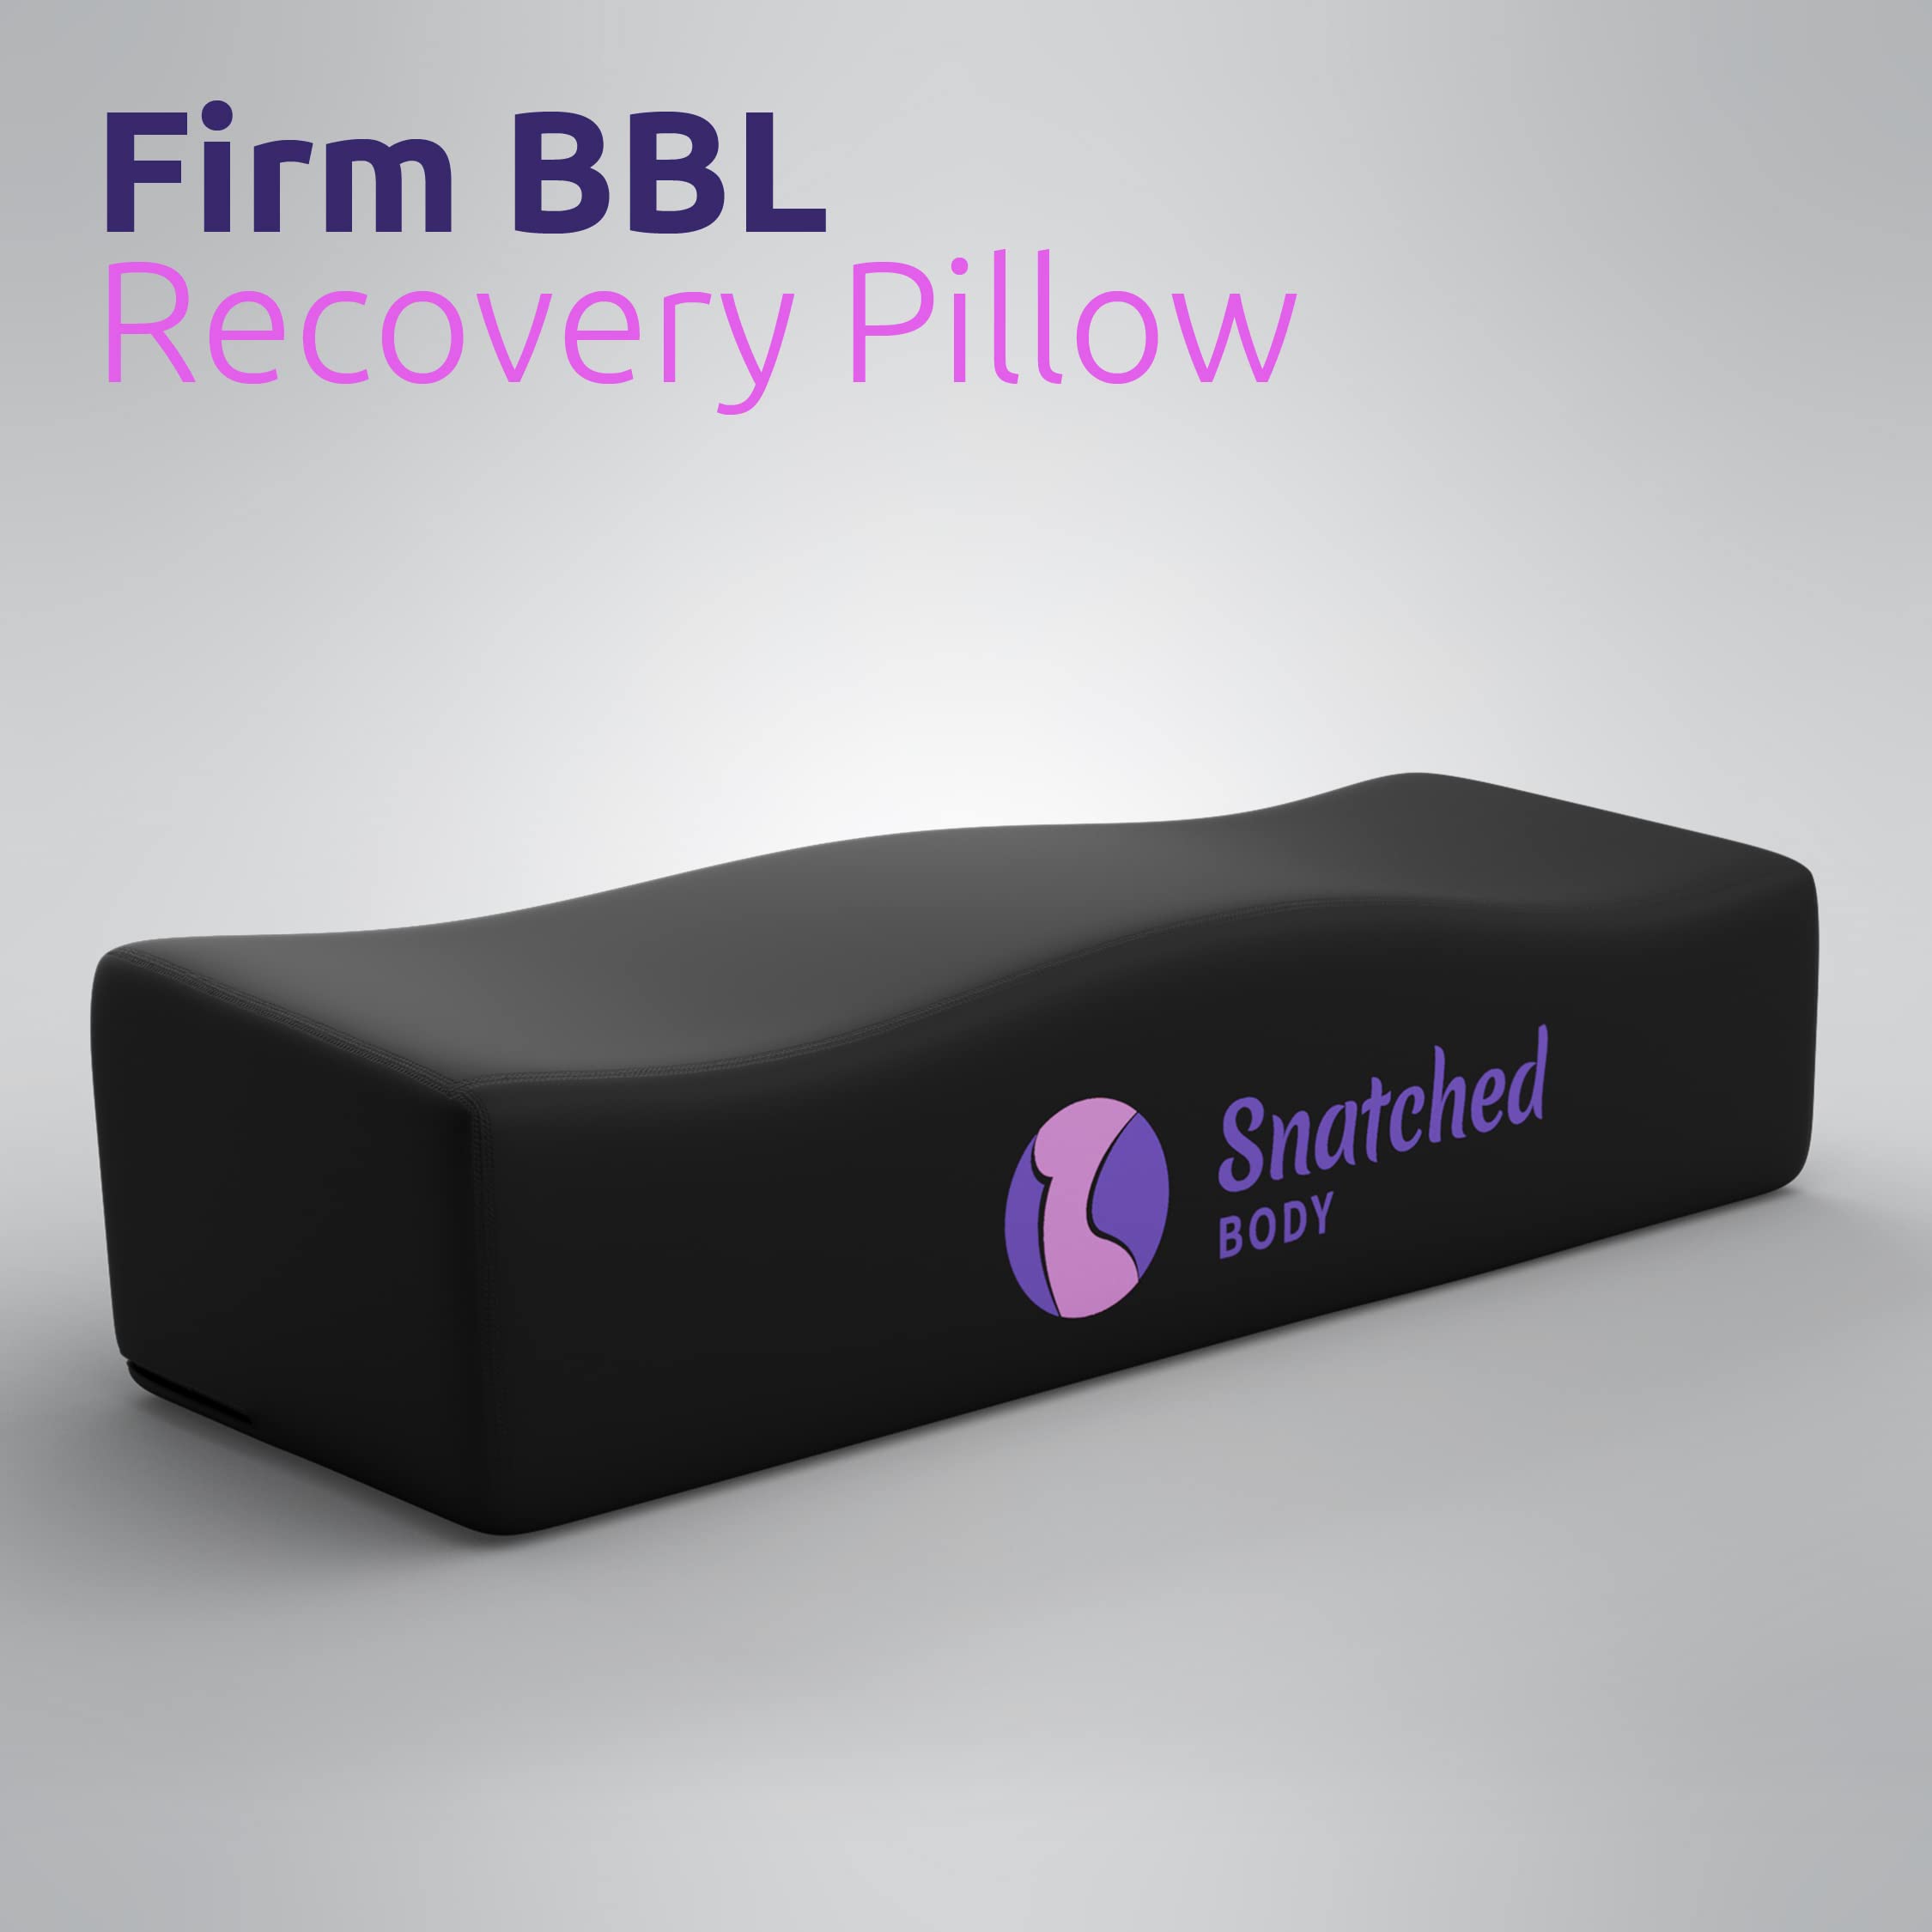 Snatched Body Back Support Post Surgery Soft BBL Booty Pillow After Surgery for Butt Recovery Cushion